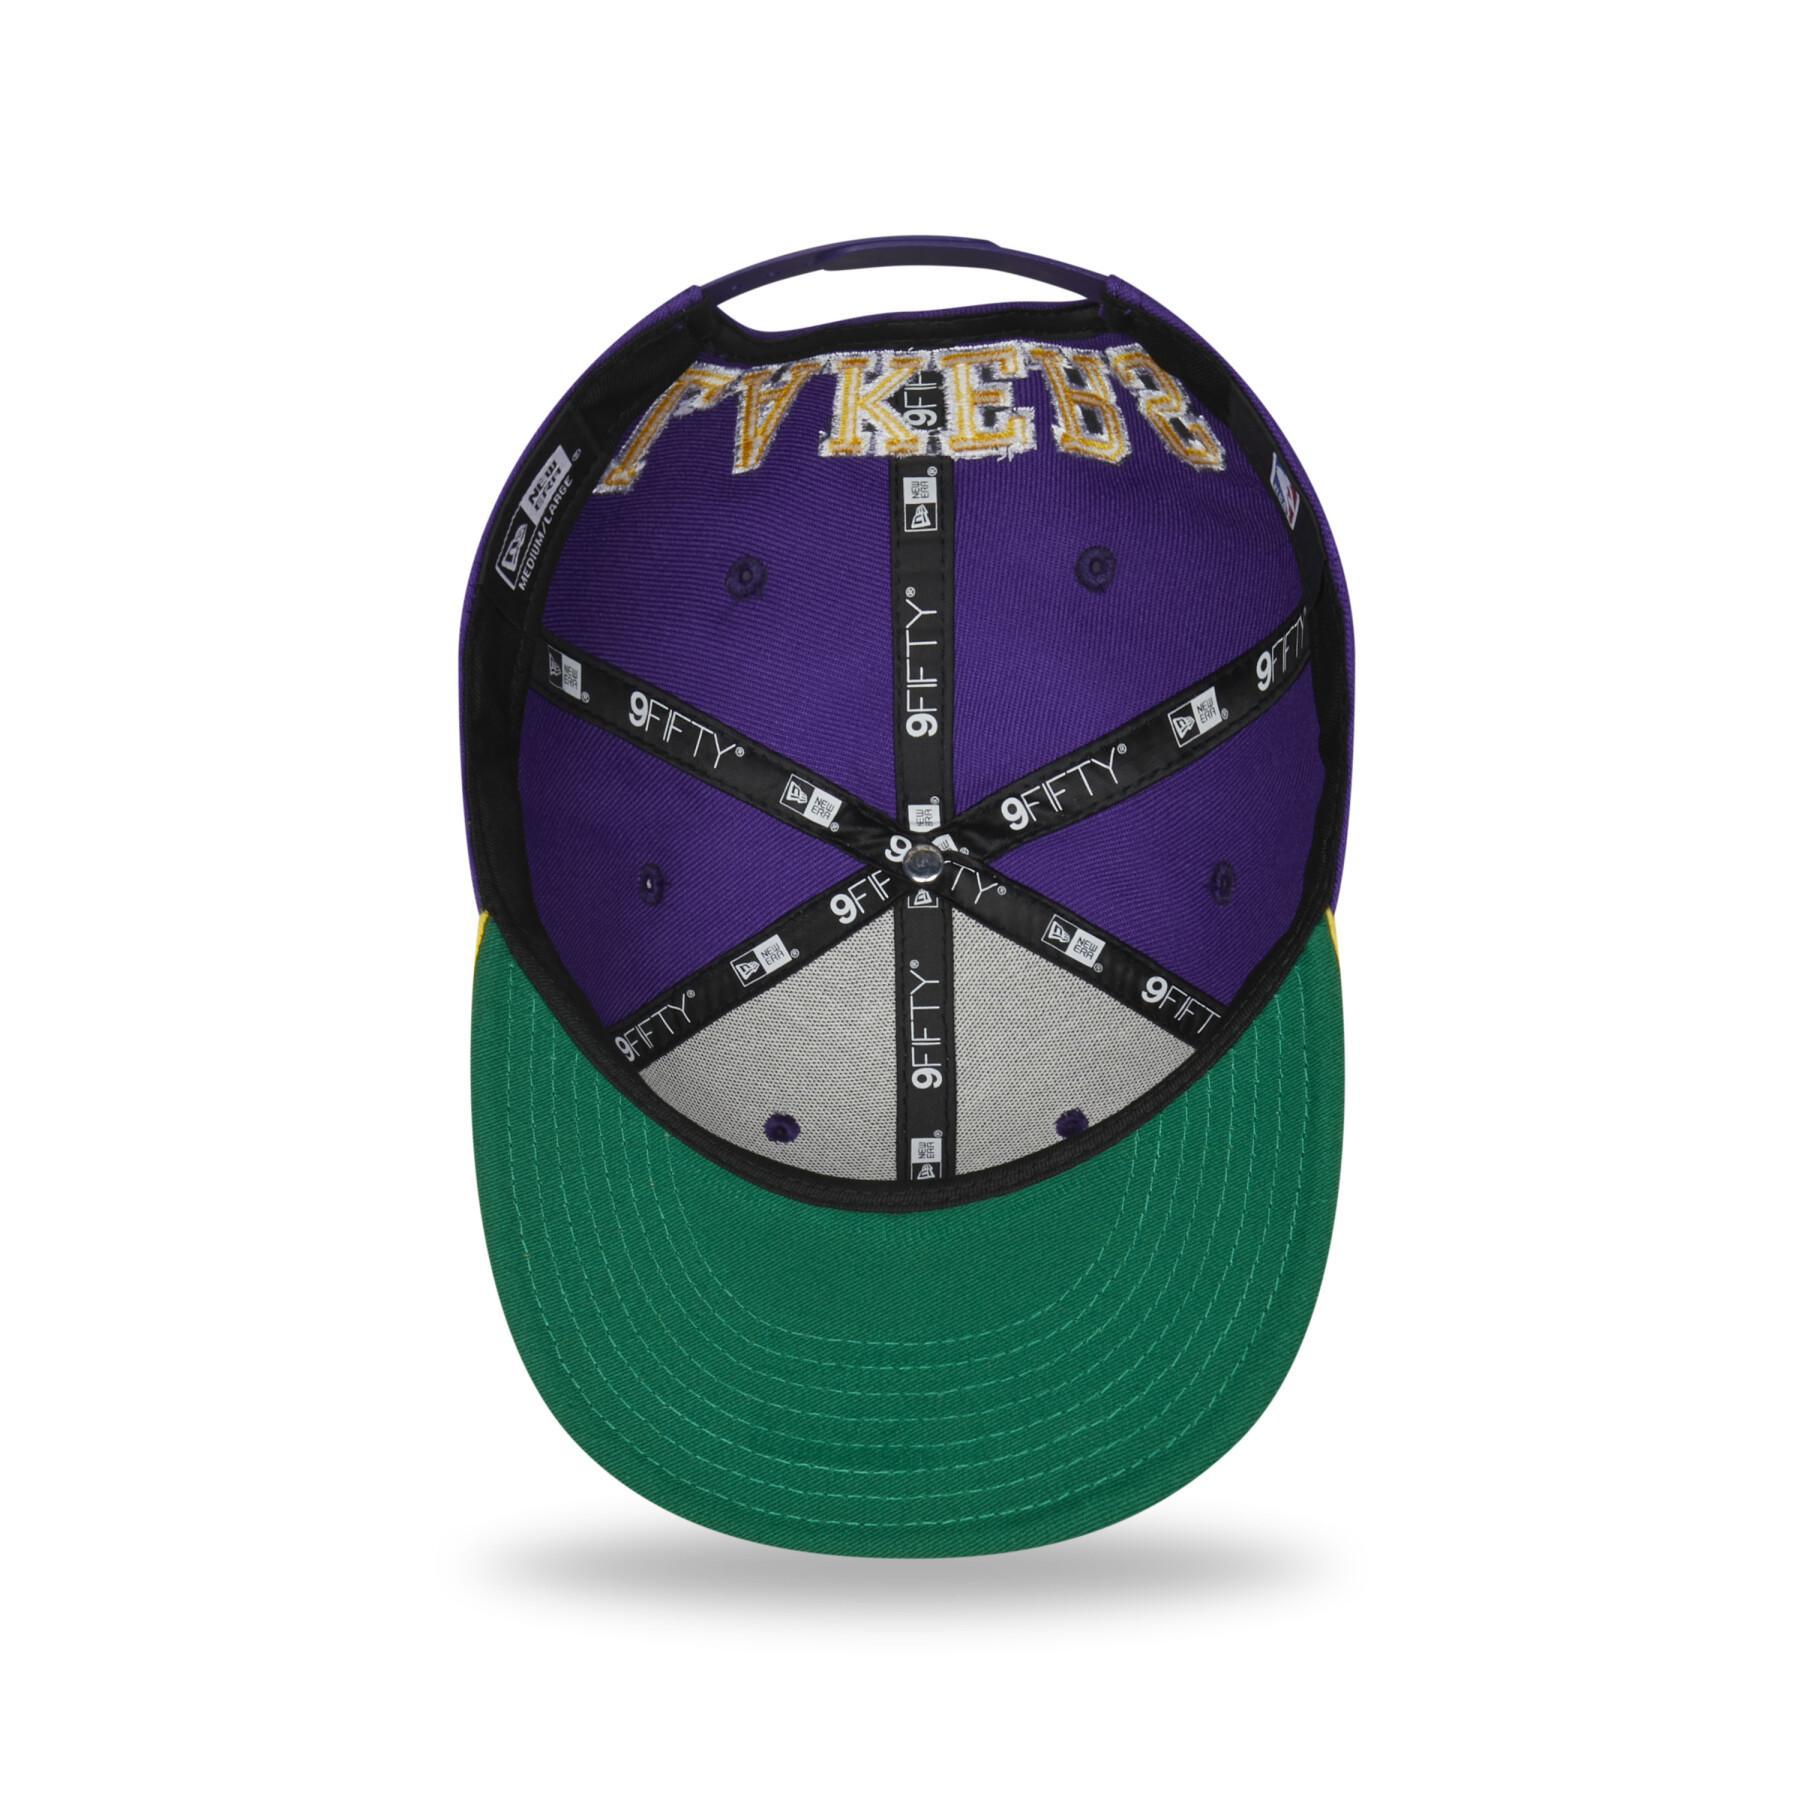 9fifty cap Los Angeles Lakers